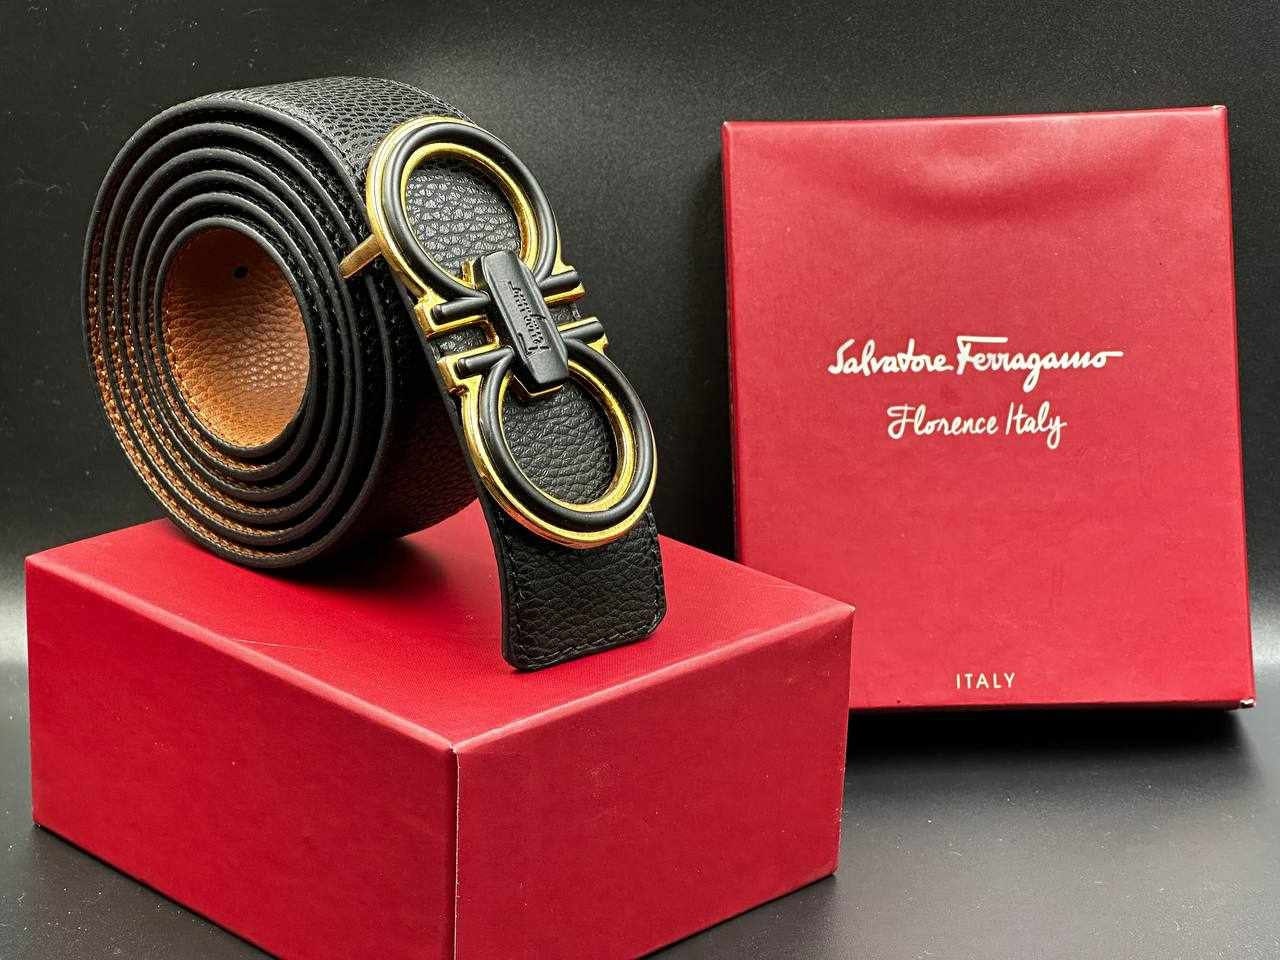 Replacement belt straps tailored to customers' Louis Vuitton LV buckles –  AQUILA®